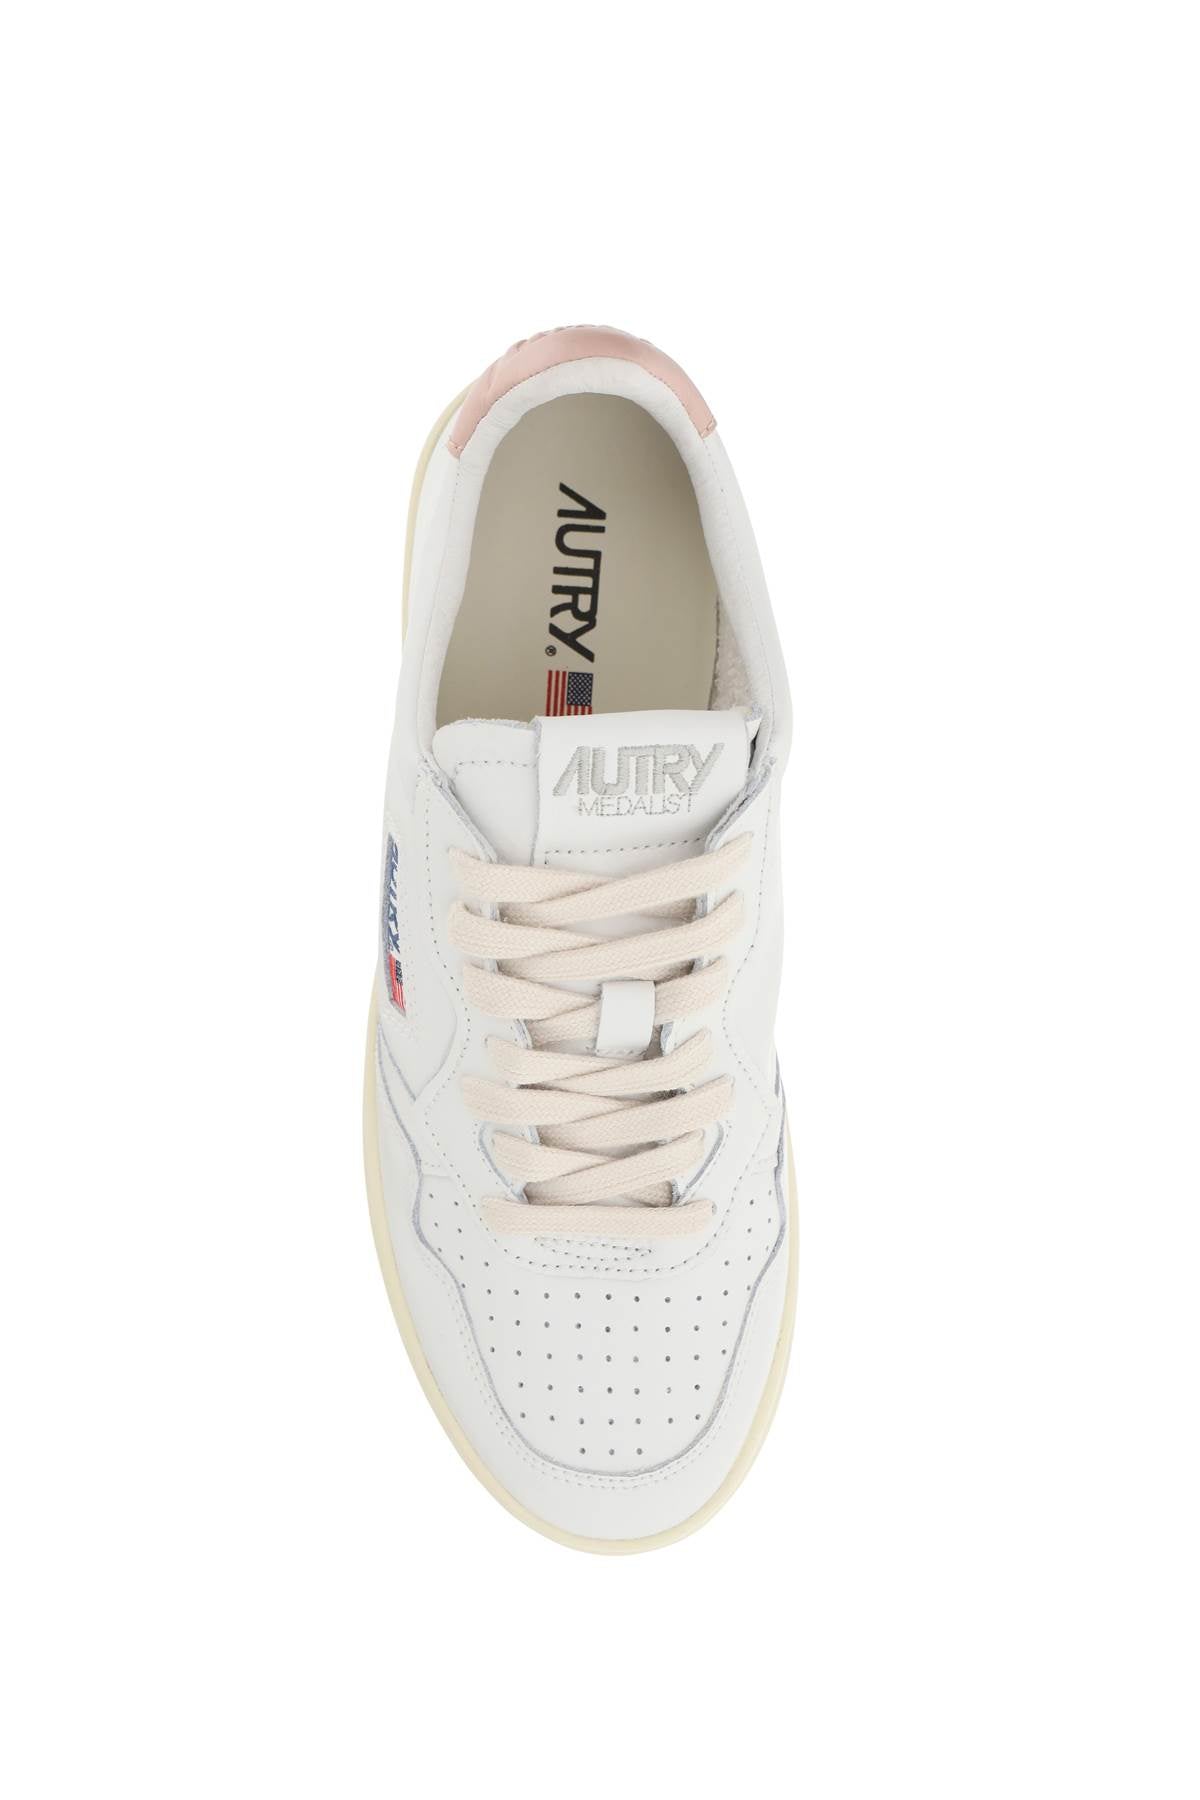 Autry leather medalist low sneakers-1